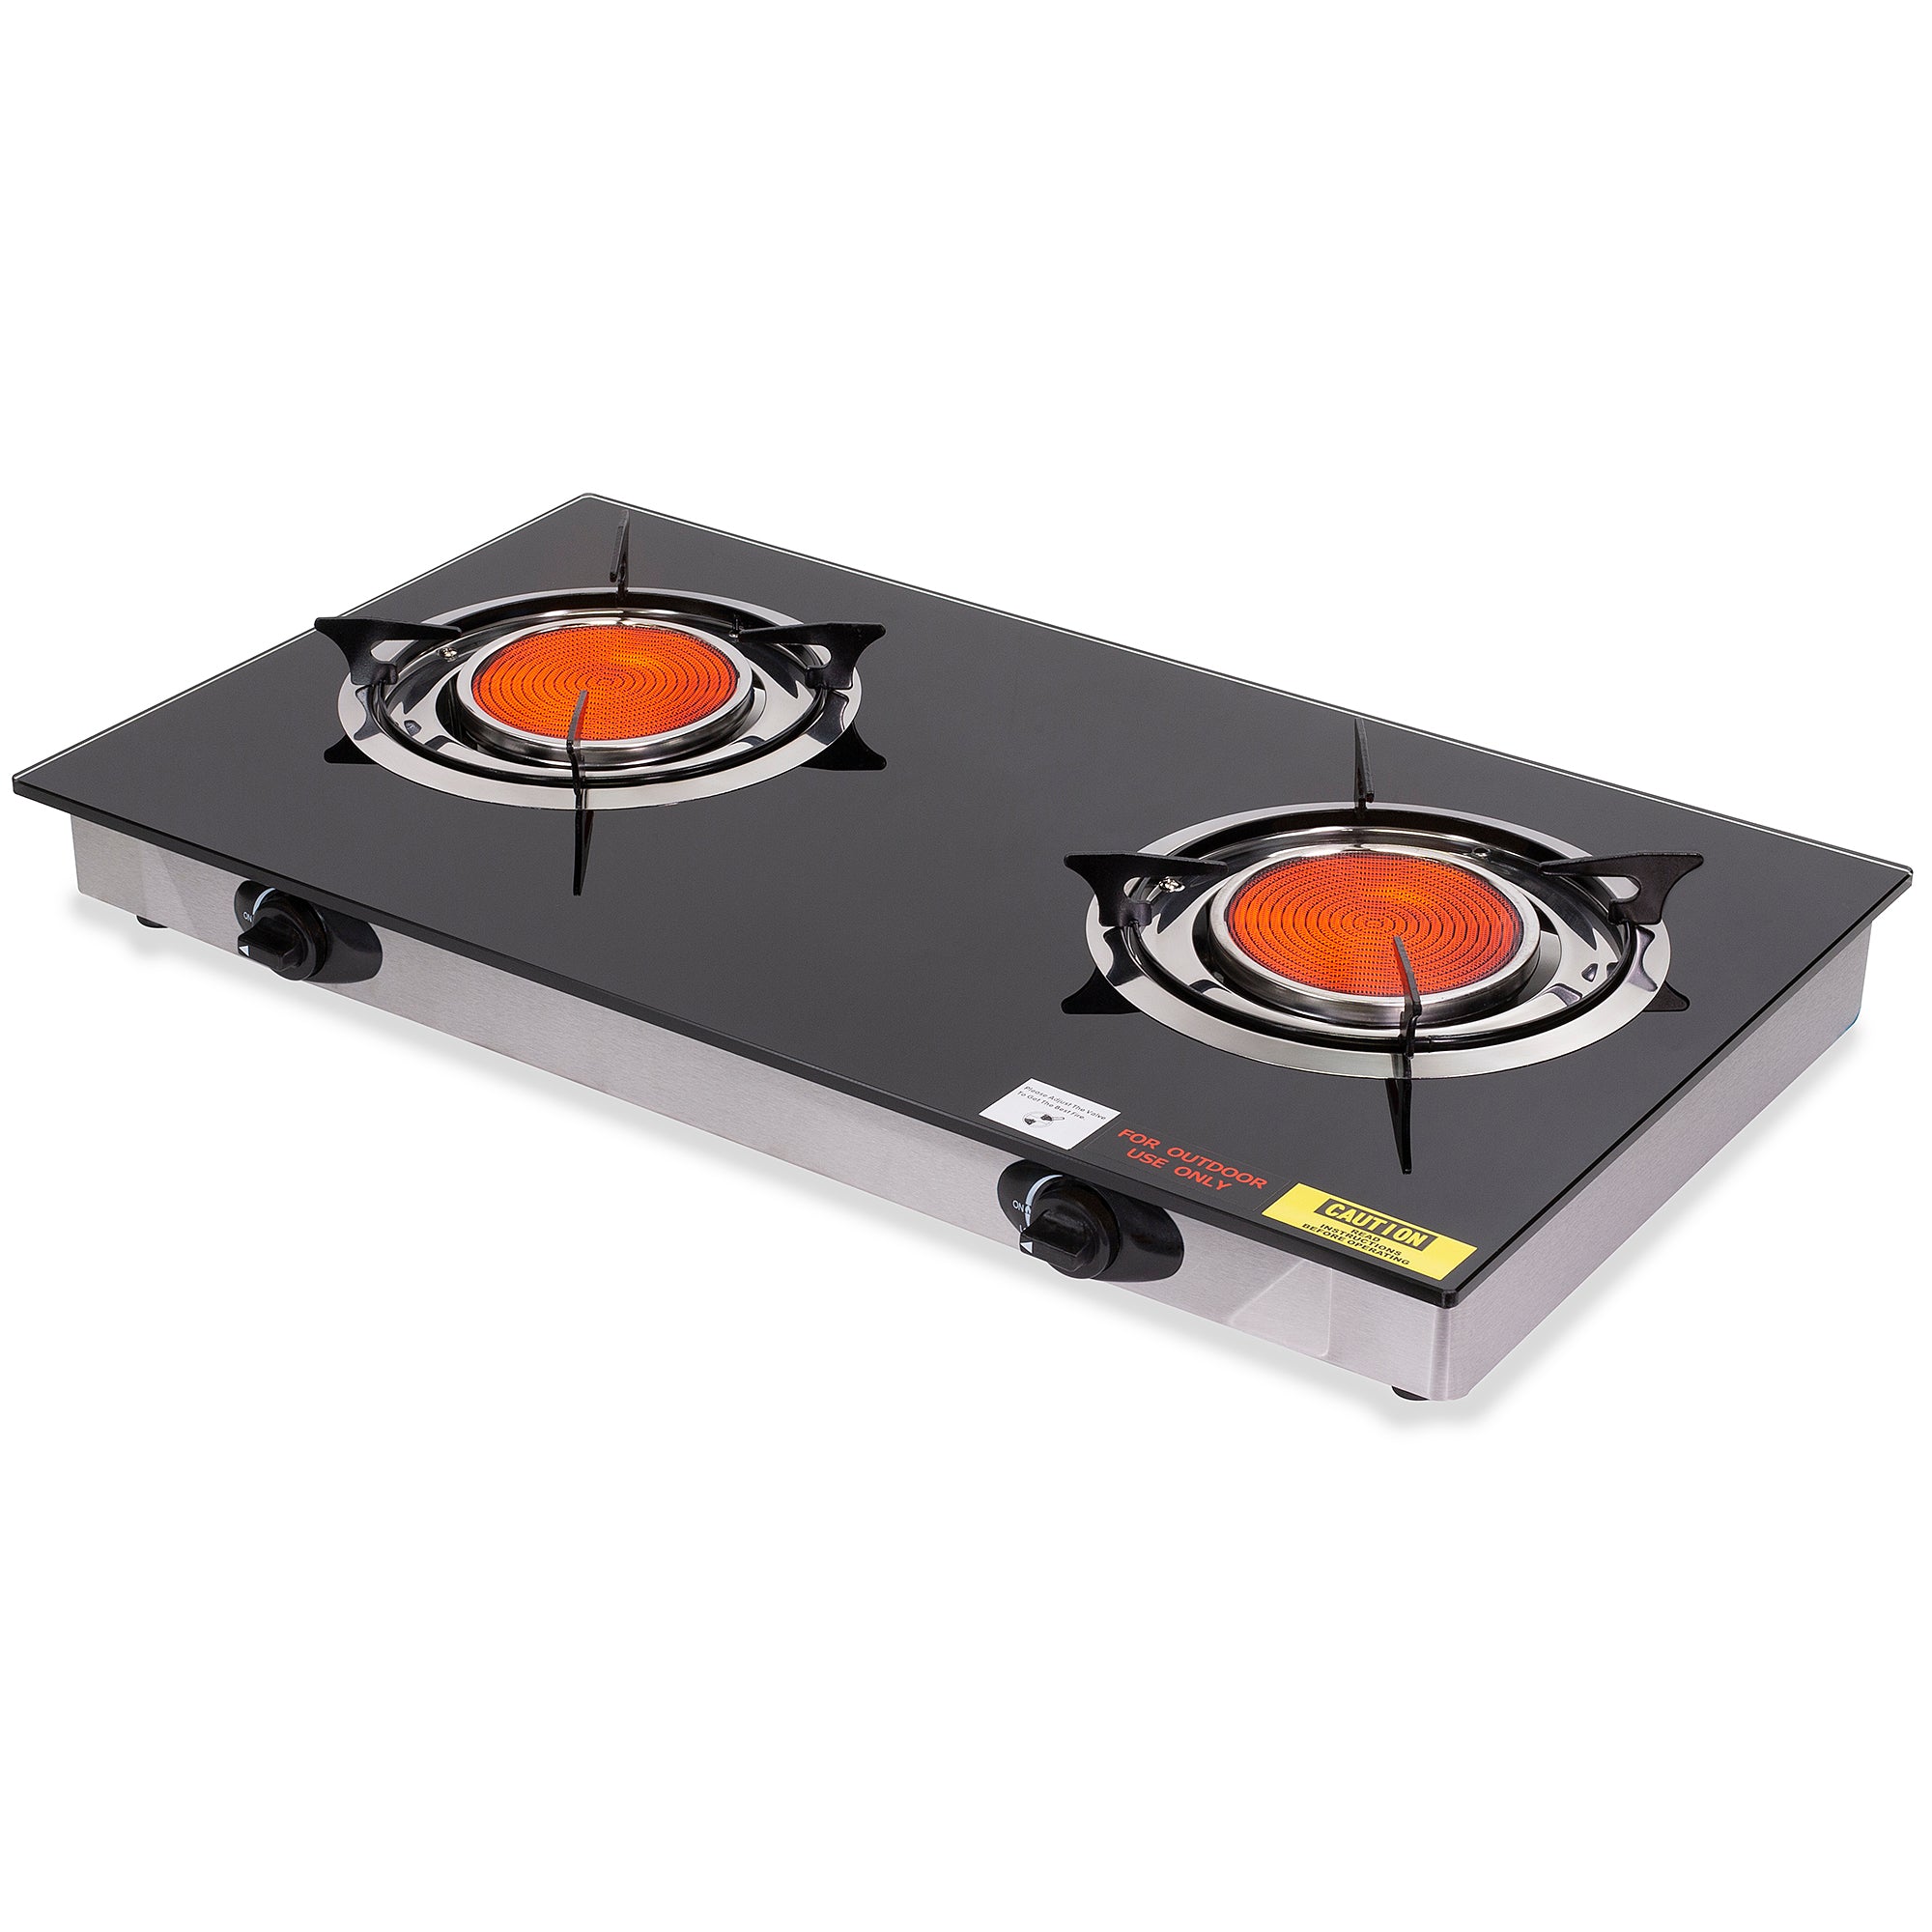 Double Portable Infrared Flame Gas Stove Large Propane Burner BBQ